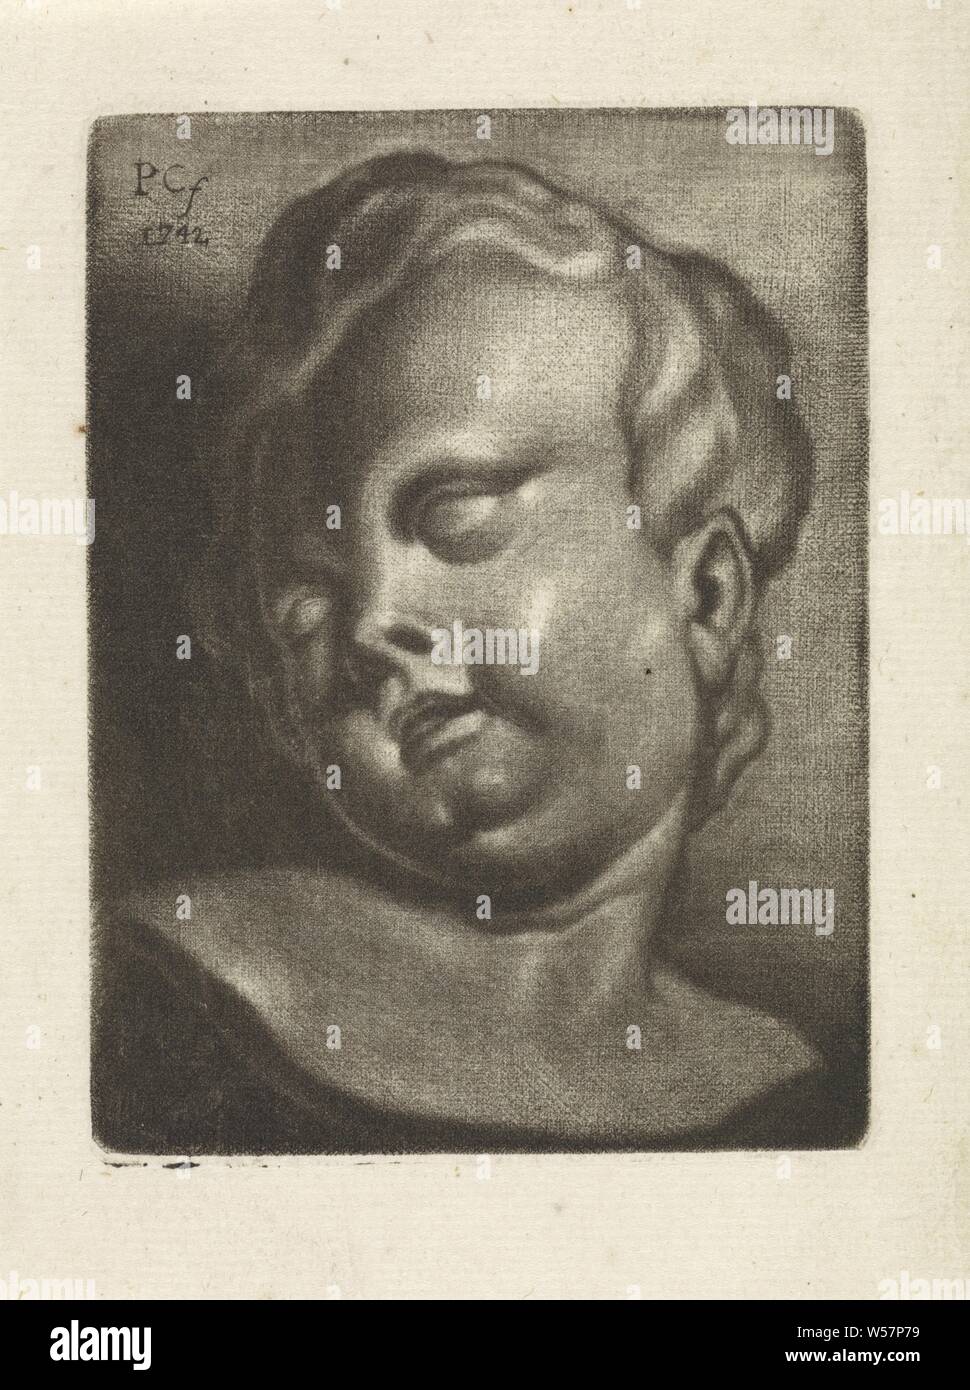 Bust of a putto, Petrus Camper (mentioned on object), London, 1742, paper, engraving, h 107 mm × w 80 mm Stock Photo